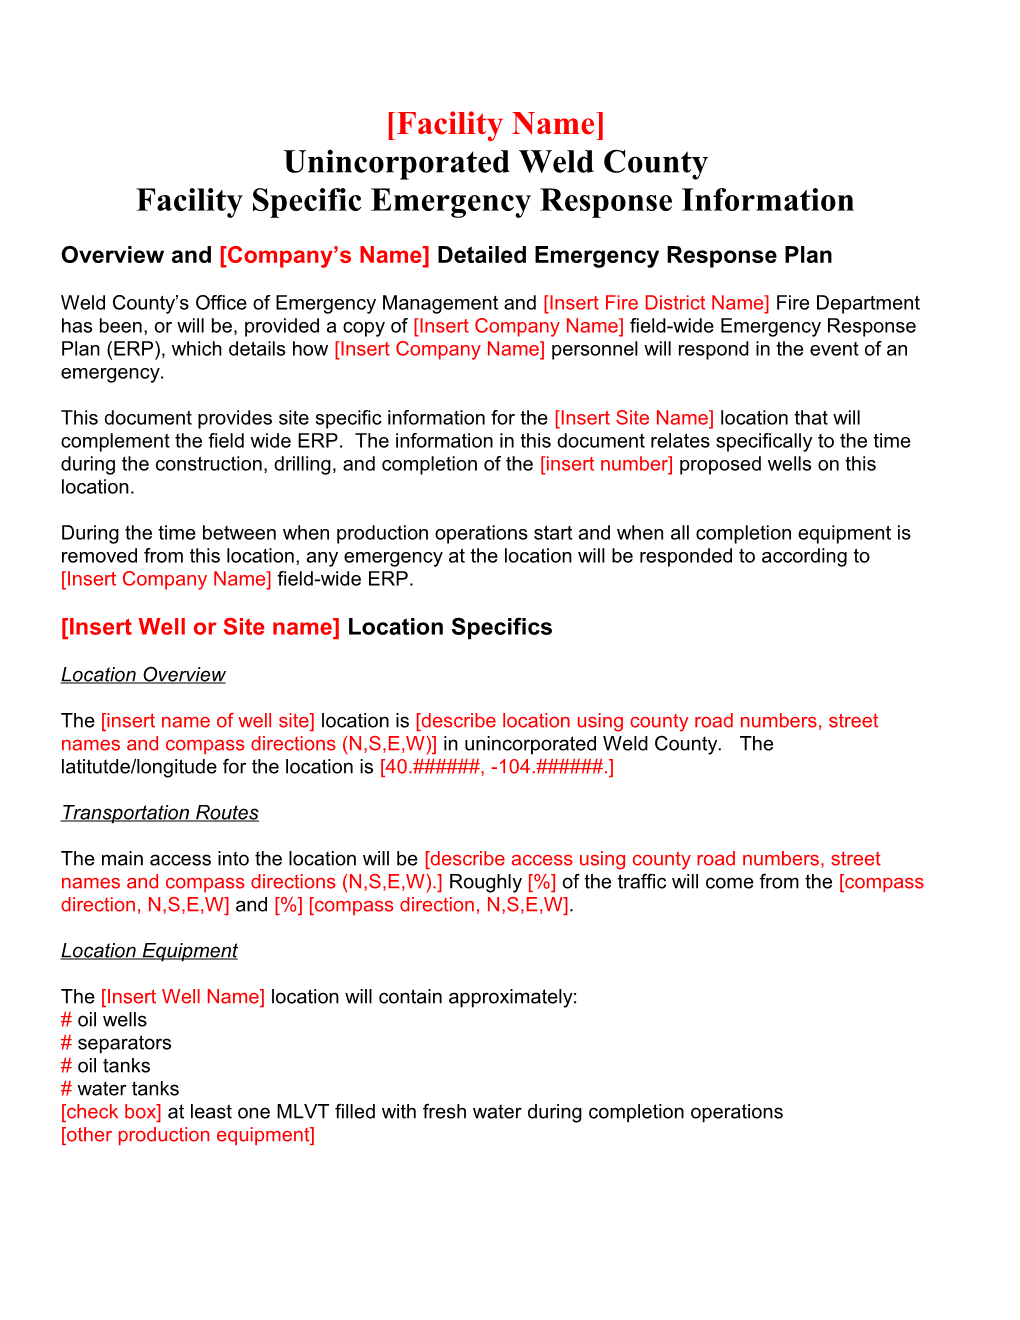 Facility Specific Emergency Response Information